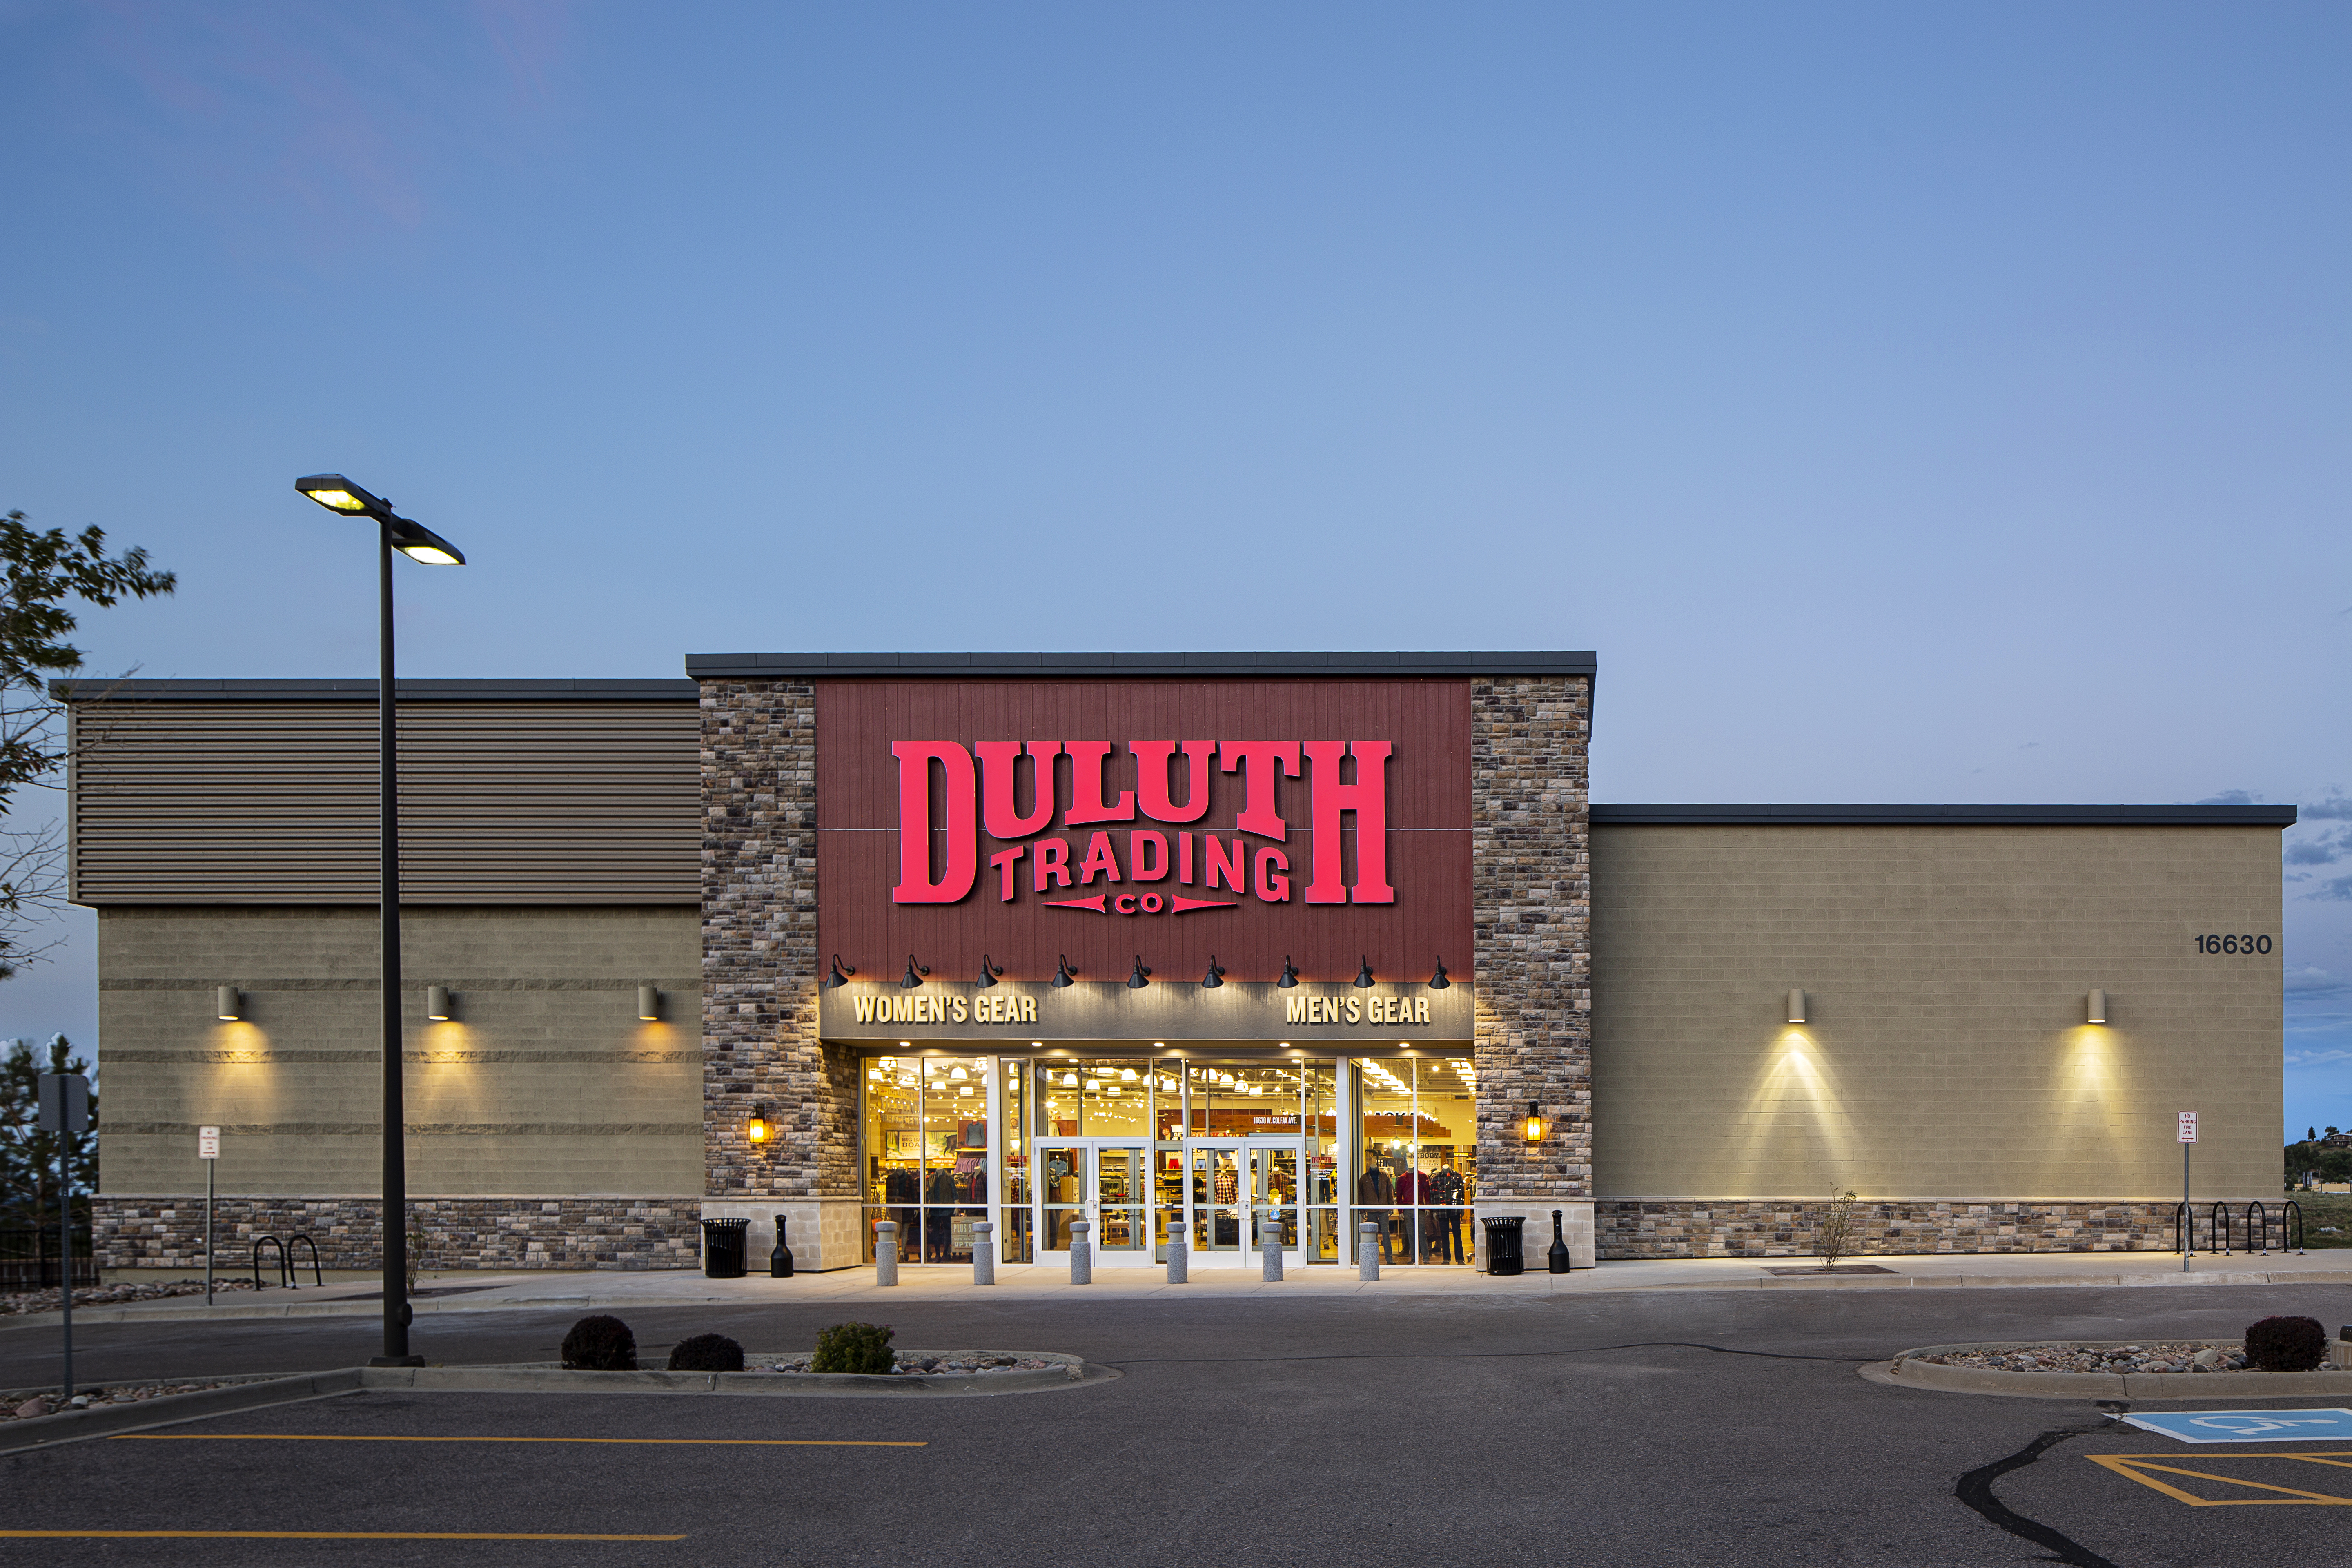 Duluth Trading Company - The selling point of these is of course